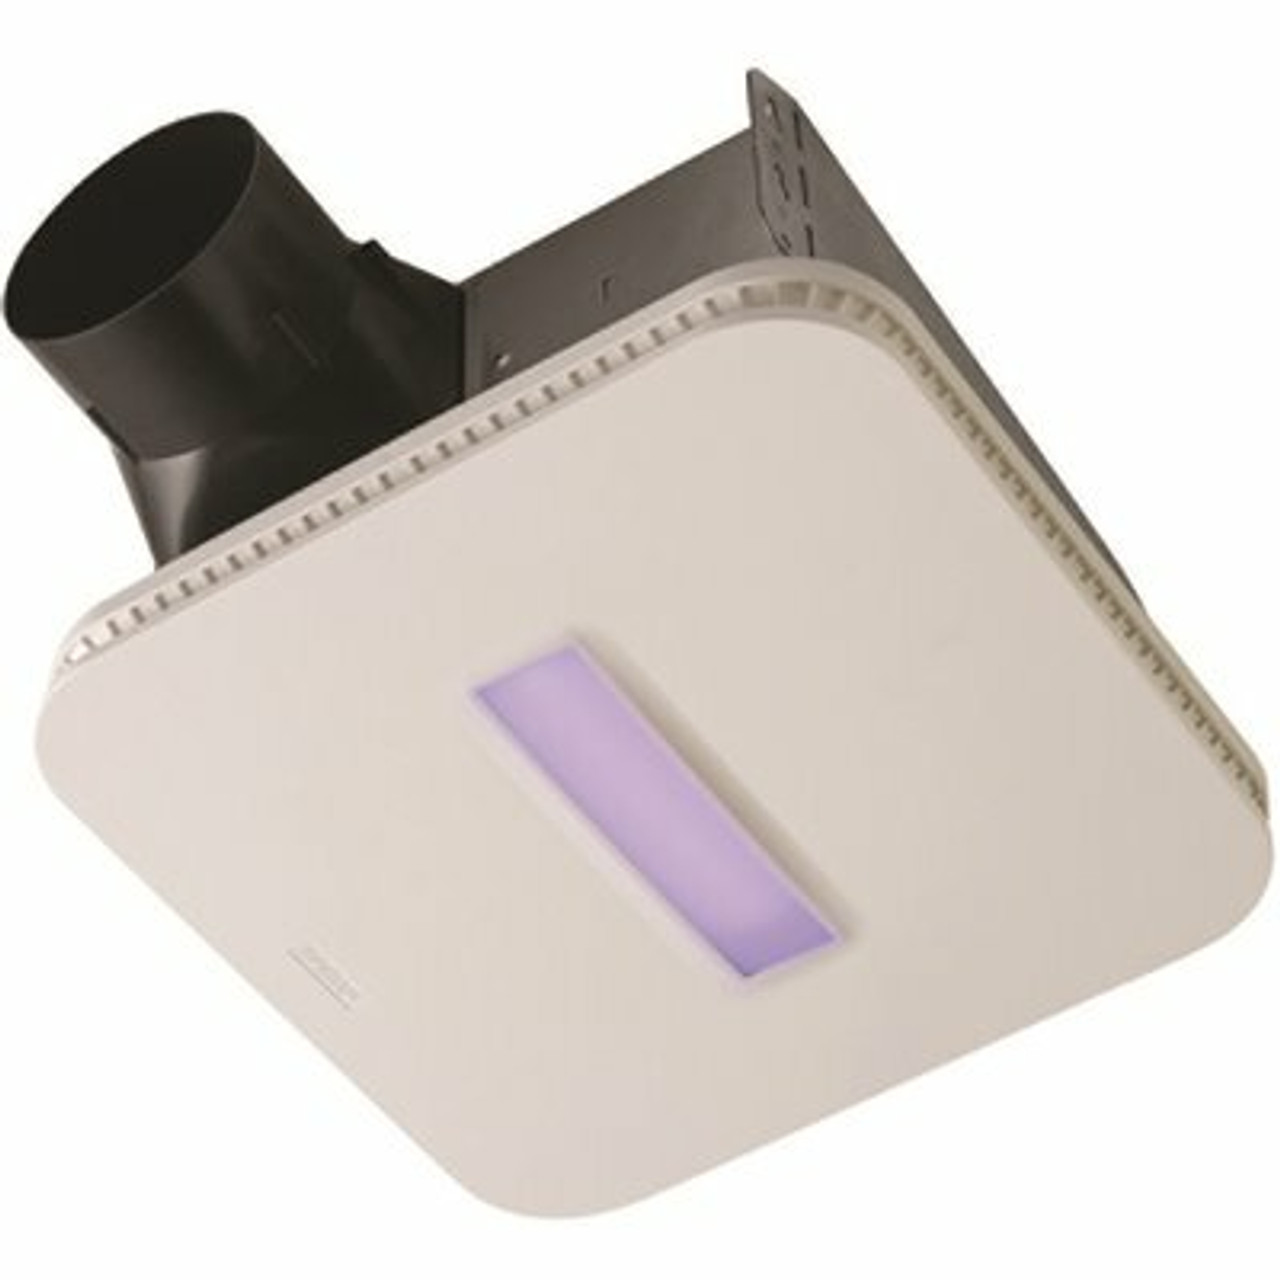 Surfaceshield Vital Vio Powered 110 Cfm Ceiling Bathroom Exhaust Fan Vent With Led White And Antibacterial Violet Light